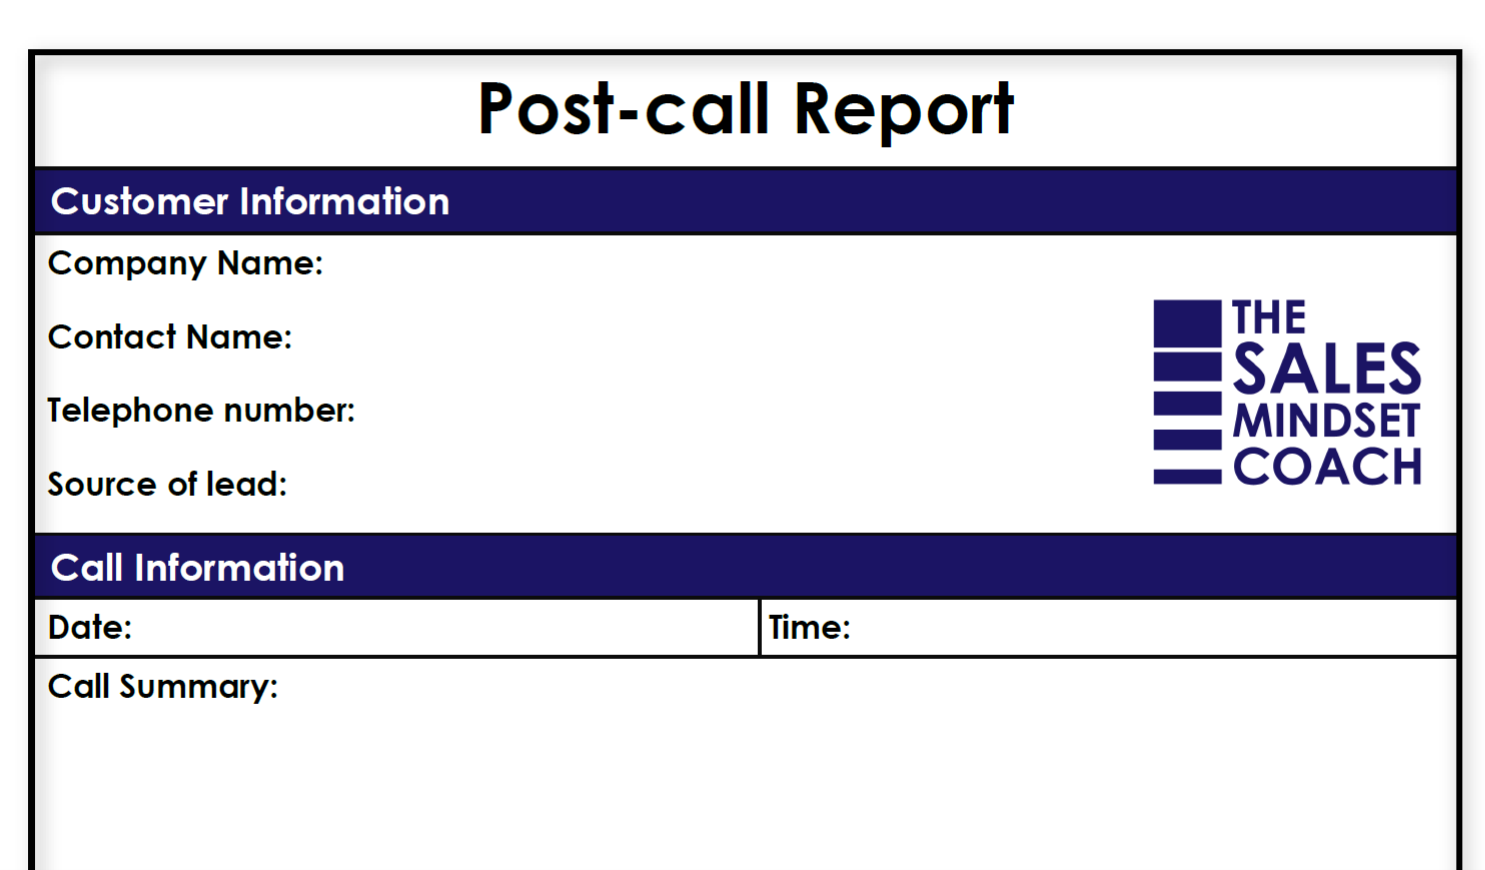 Post-call report template - The Sales Mindset Coach Throughout Customer Contact Report Template